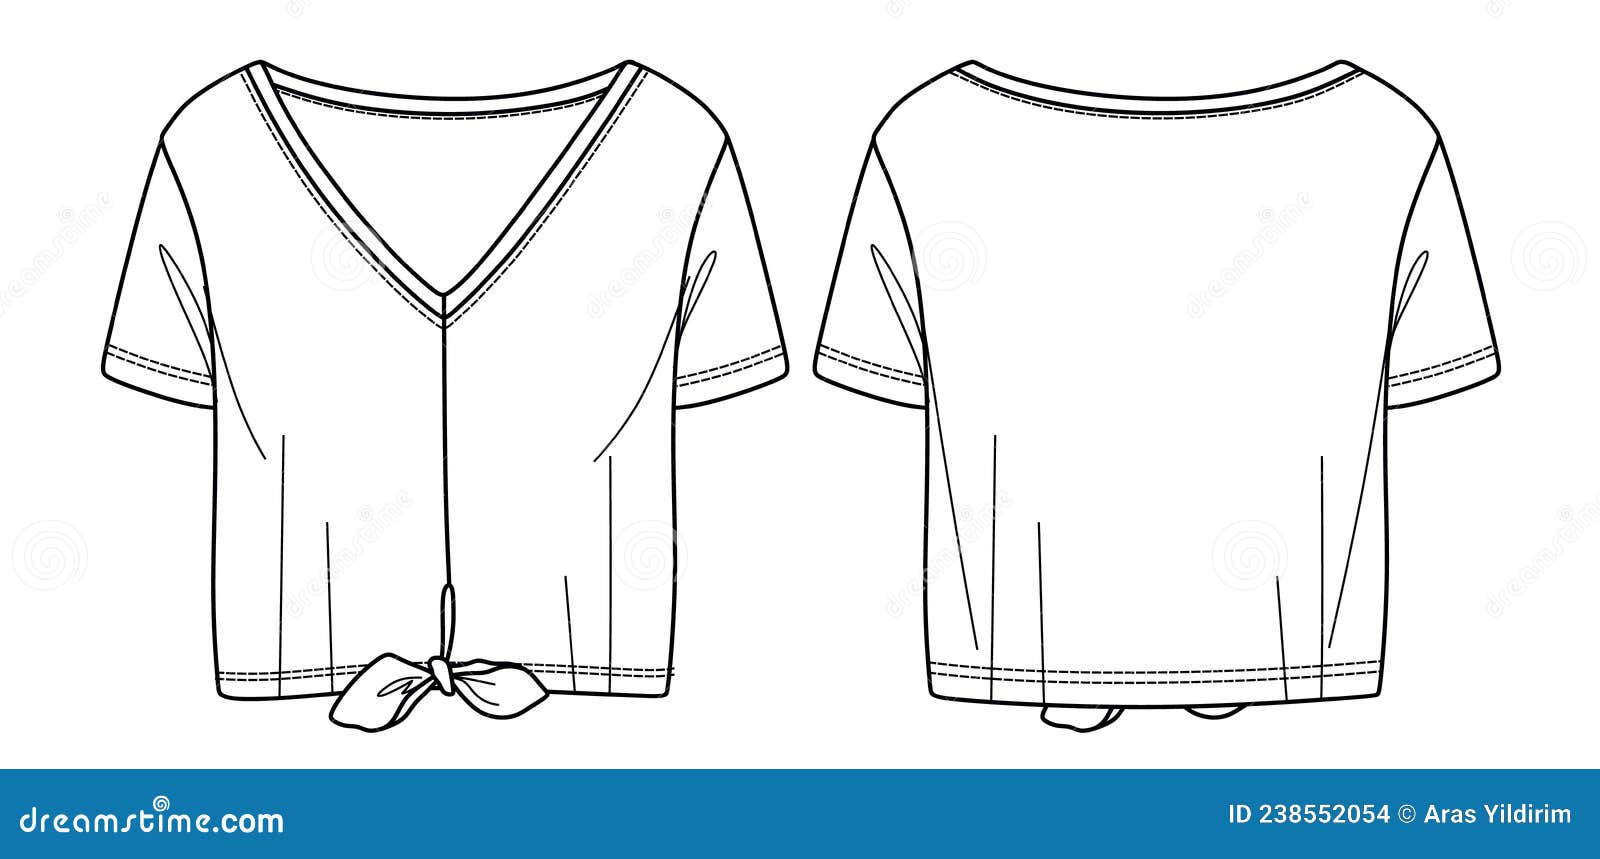 Illustrator Fashion Sketches Tops- Shirt Template 046 - download